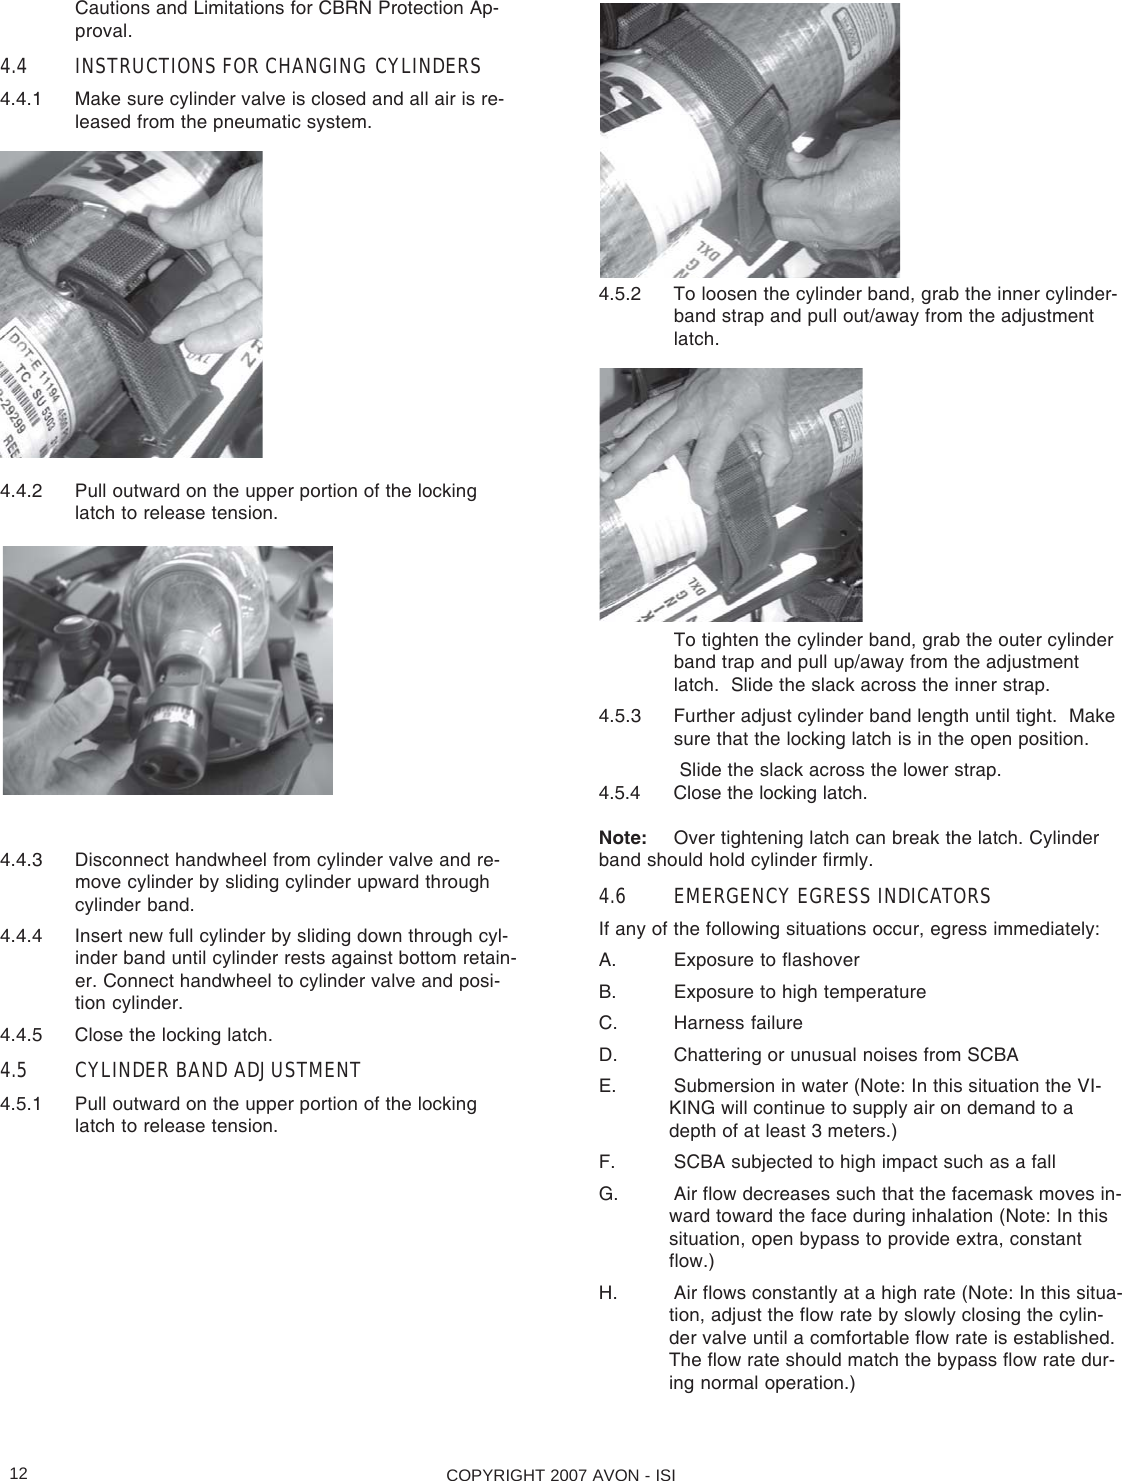 COPYRIGHT 2007 AVON - ISI12Cautions and Limitations for CBRN Protection Ap-proval.4.4 INSTRUCTIONS FOR CHANGING CYLINDERS4.4.1 Make sure cylinder valve is closed and all air is re-leased from the pneumatic system.4.4.2 Pull outward on the upper portion of the lockinglatch to release tension.4.4.3 Disconnect handwheel from cylinder valve and re-move cylinder by sliding cylinder upward throughcylinder band.4.4.4 Insert new full cylinder by sliding down through cyl-inder band until cylinder rests against bottom retain-er. Connect handwheel to cylinder valve and posi-tion cylinder.4.4.5 Close the locking latch.4.5 CYLINDER BAND ADJUSTMENT4.5.1 Pull outward on the upper portion of the lockinglatch to release tension.4.5.2 To loosen the cylinder band, grab the inner cylinder-band strap and pull out/away from the adjustmentlatch.To tighten the cylinder band, grab the outer cylinderband trap and pull up/away from the adjustmentlatch.  Slide the slack across the inner strap.4.5.3 Further adjust cylinder band length until tight.  Makesure that the locking latch is in the open position. Slide the slack across the lower strap.4.5.4 Close the locking latch.Note: Over tightening latch can break the latch. Cylinderband should hold cylinder firmly.4.6 EMERGENCY EGRESS INDICATORSIf any of the following situations occur, egress immediately:A. Exposure to flashoverB. Exposure to high temperatureC. Harness failureD. Chattering or unusual noises from SCBAE. Submersion in water (Note: In this situation the VI-KING will continue to supply air on demand to adepth of at least 3 meters.)F. SCBA subjected to high impact such as a fallG. Air flow decreases such that the facemask moves in-ward toward the face during inhalation (Note: In thissituation, open bypass to provide extra, constantflow.)H. Air flows constantly at a high rate (Note: In this situa-tion, adjust the flow rate by slowly closing the cylin-der valve until a comfortable flow rate is established.The flow rate should match the bypass flow rate dur-ing normal operation.)